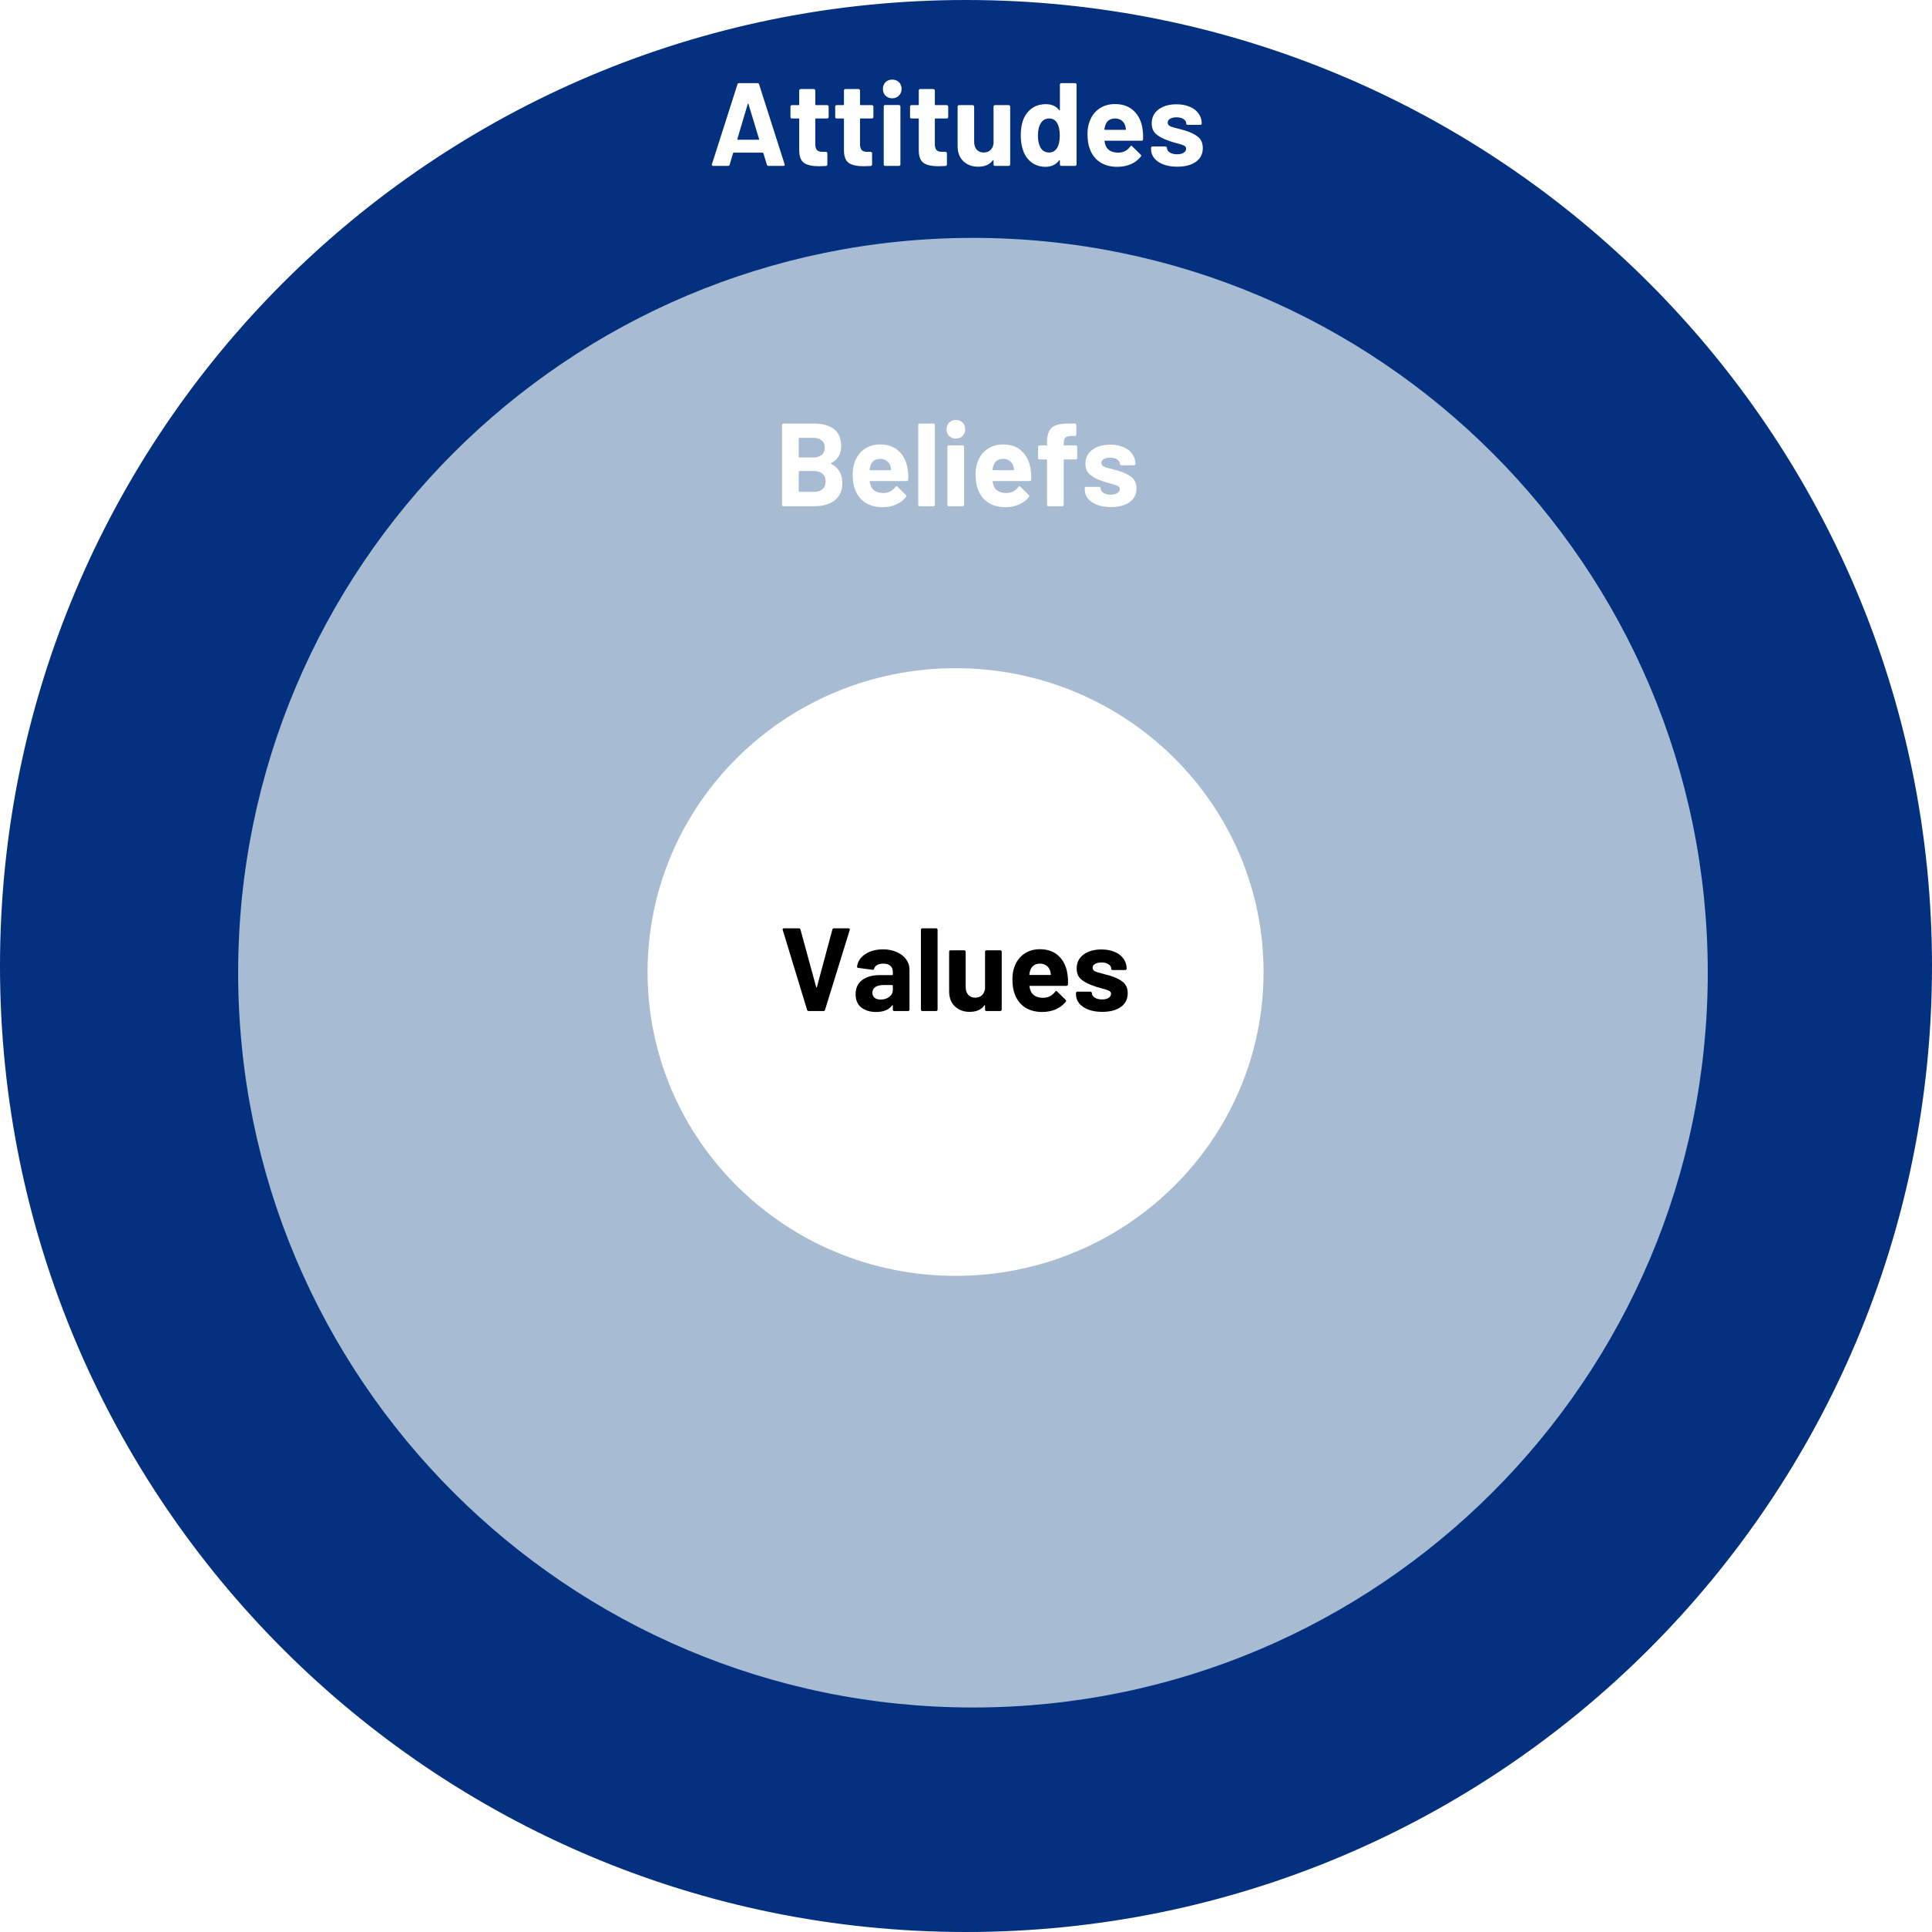 3 circles nested inside eachother. From outermost circle to the innermost: Attitudes, beliefs, values.